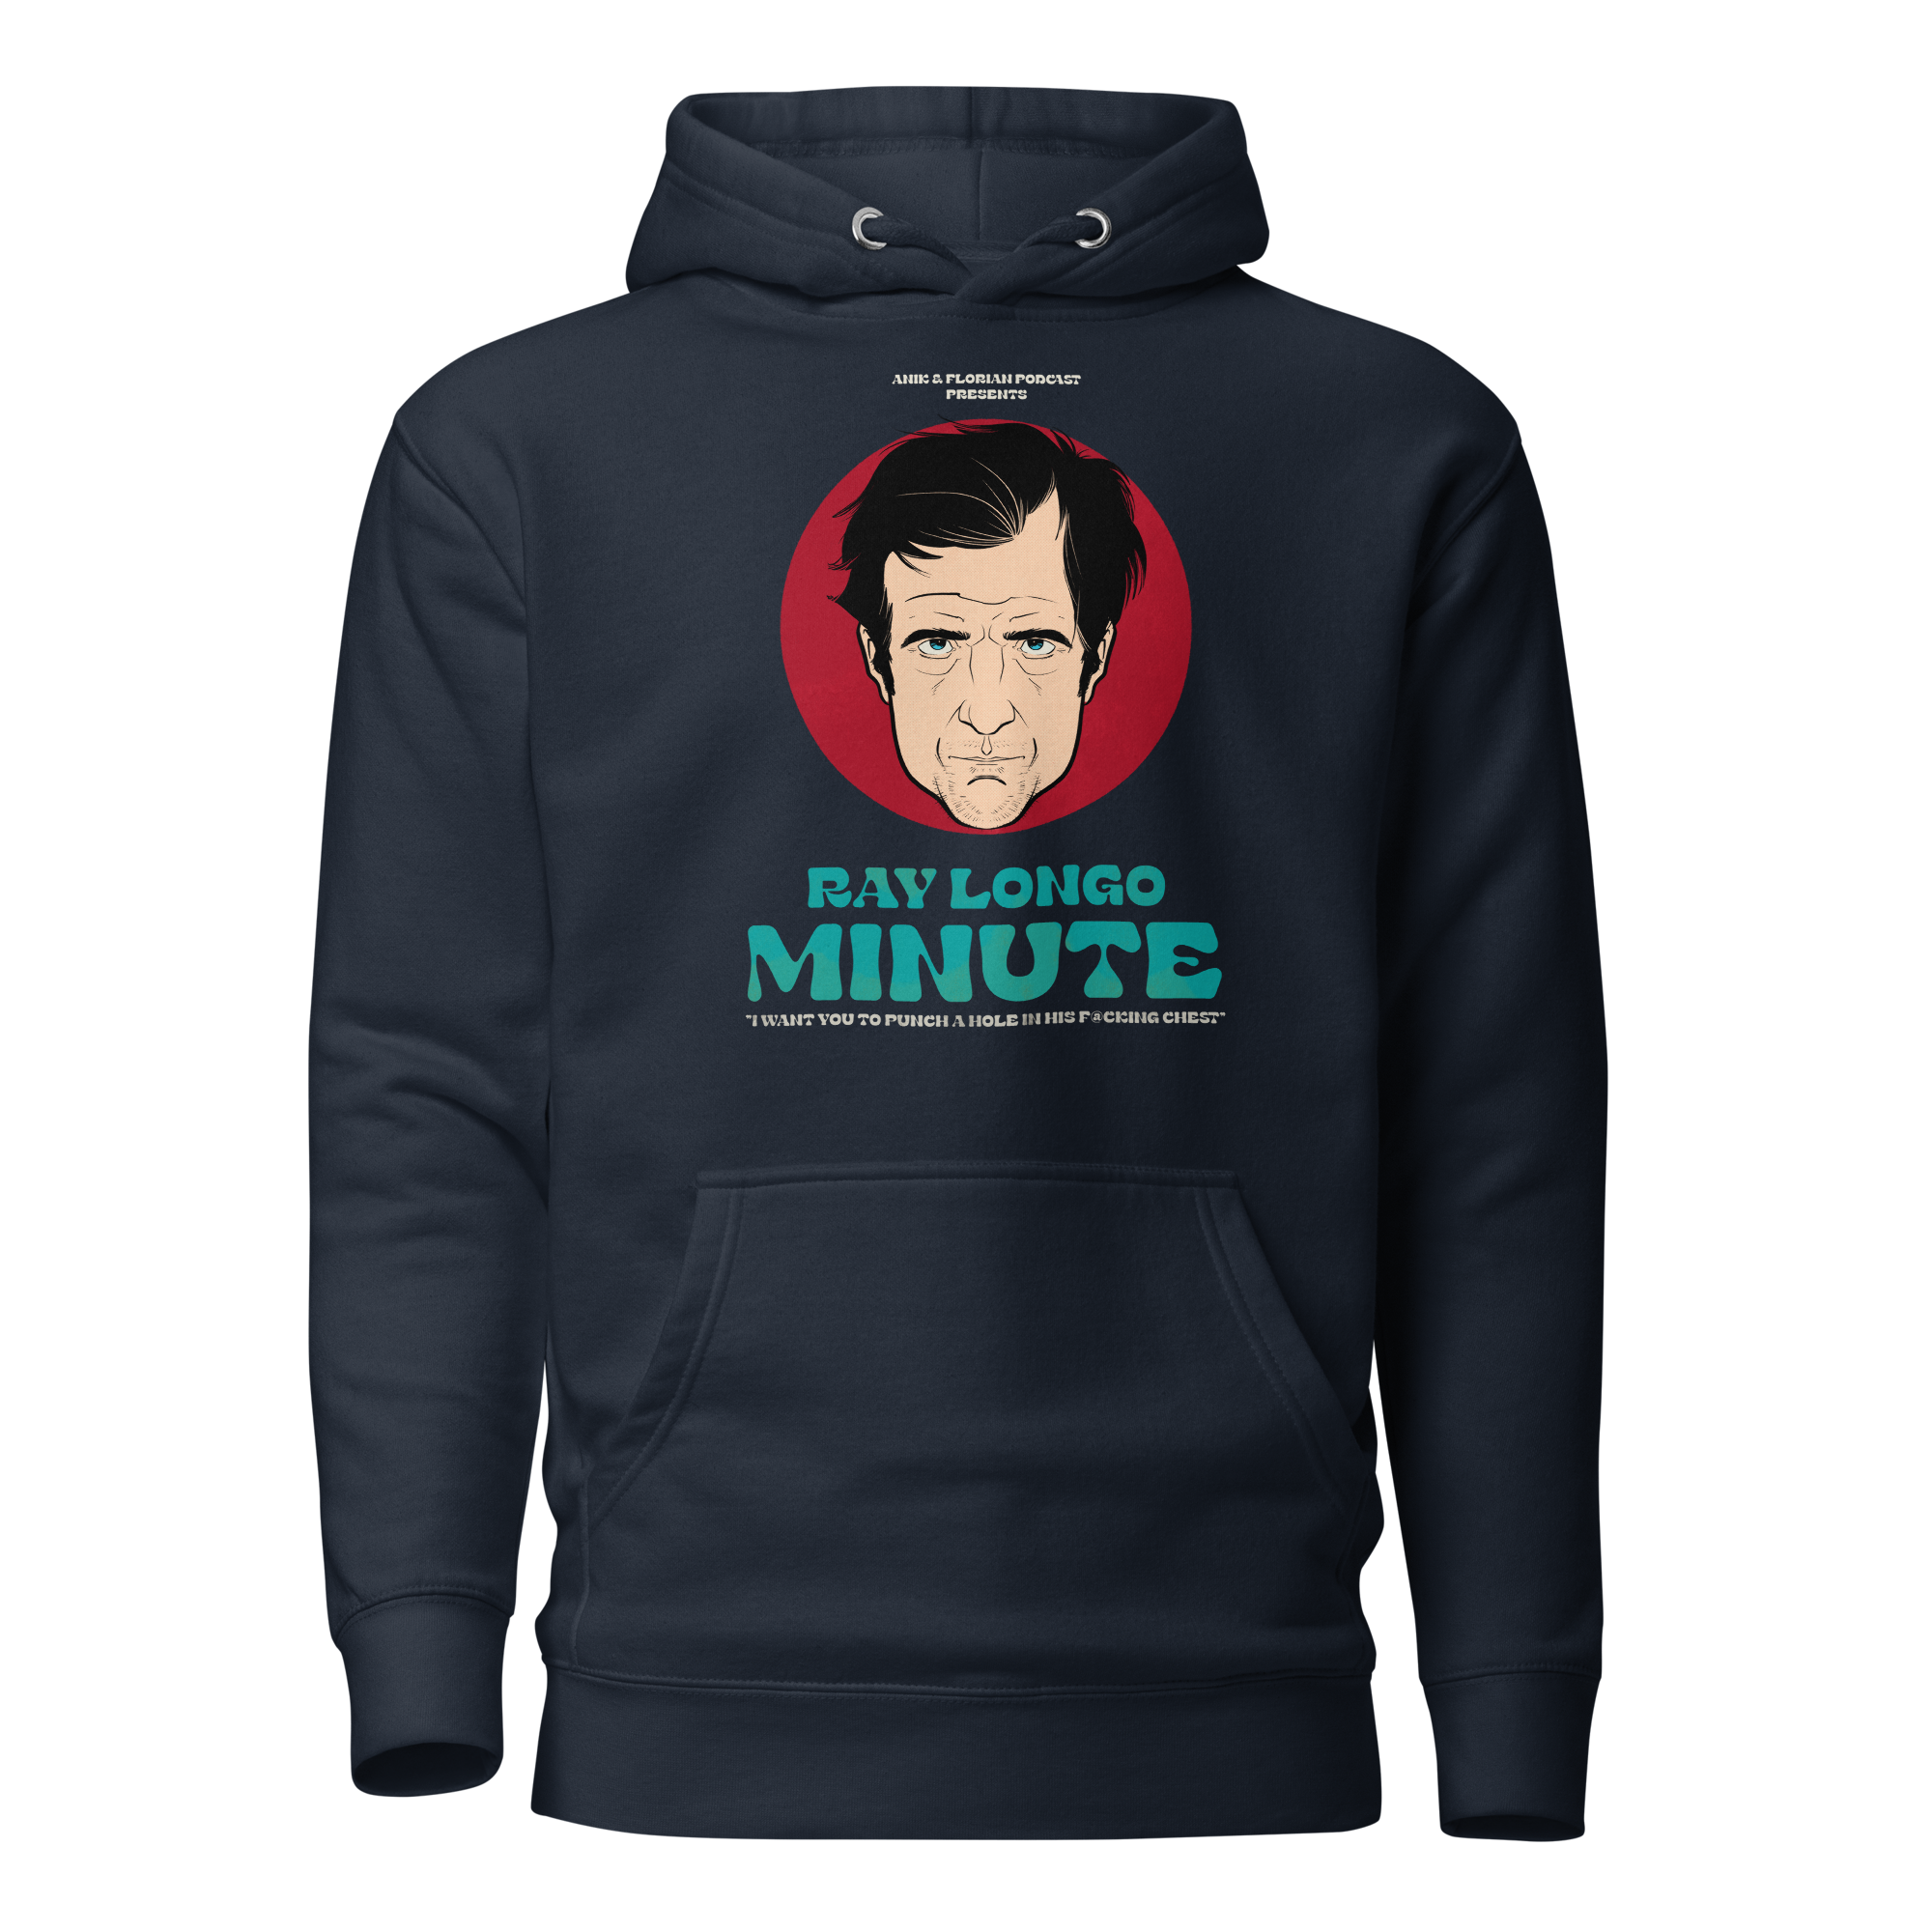 Ray Longo Minute Hoodie in Navy from the Anik & Florian Podcast Merch Collection